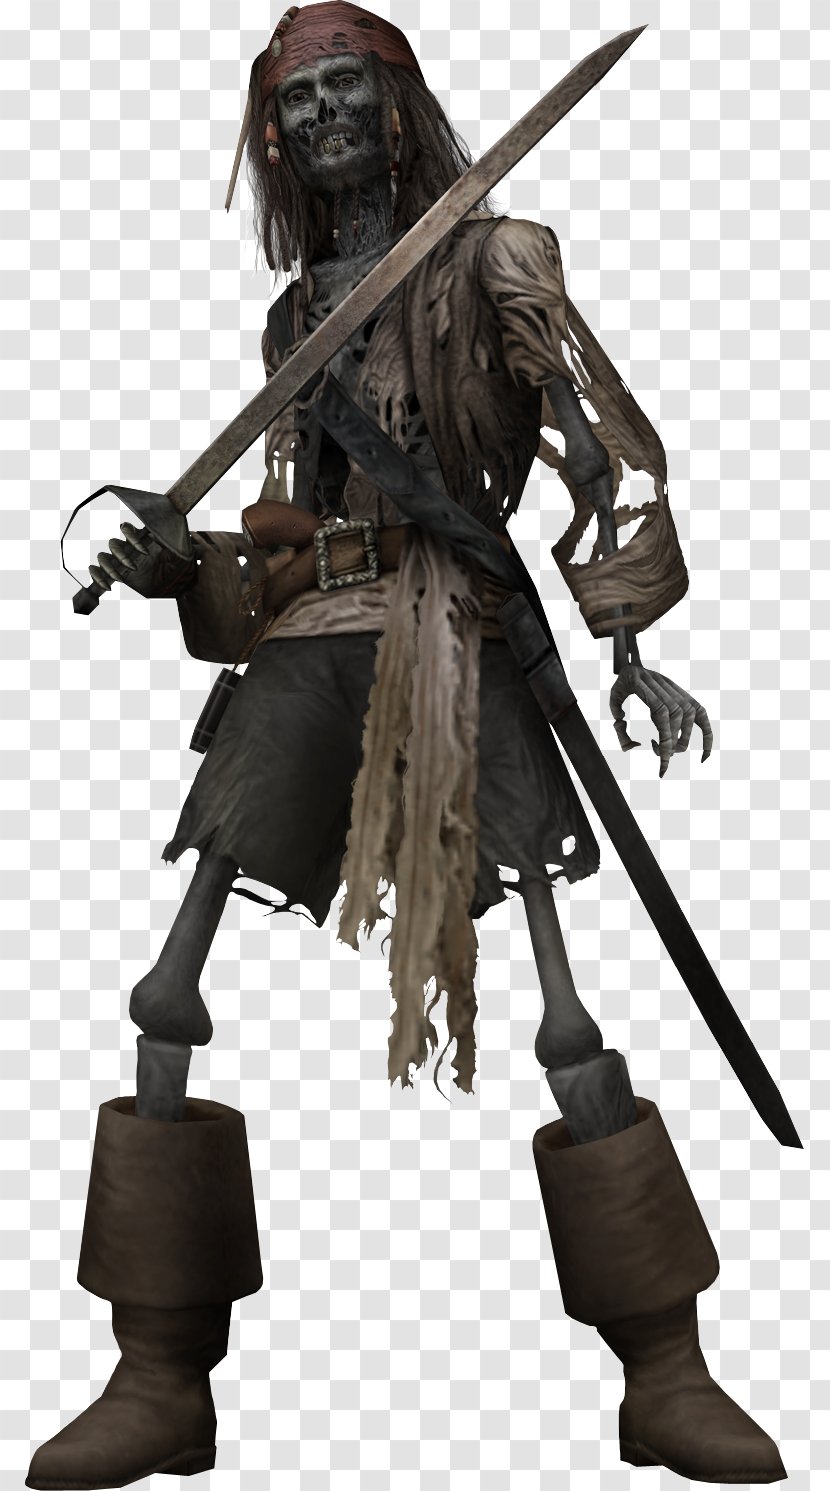 Jack Sparrow Kingdom Hearts II HD 1.5 Remix Will Turner Pirates Of The Caribbean - Fictional Character Transparent PNG